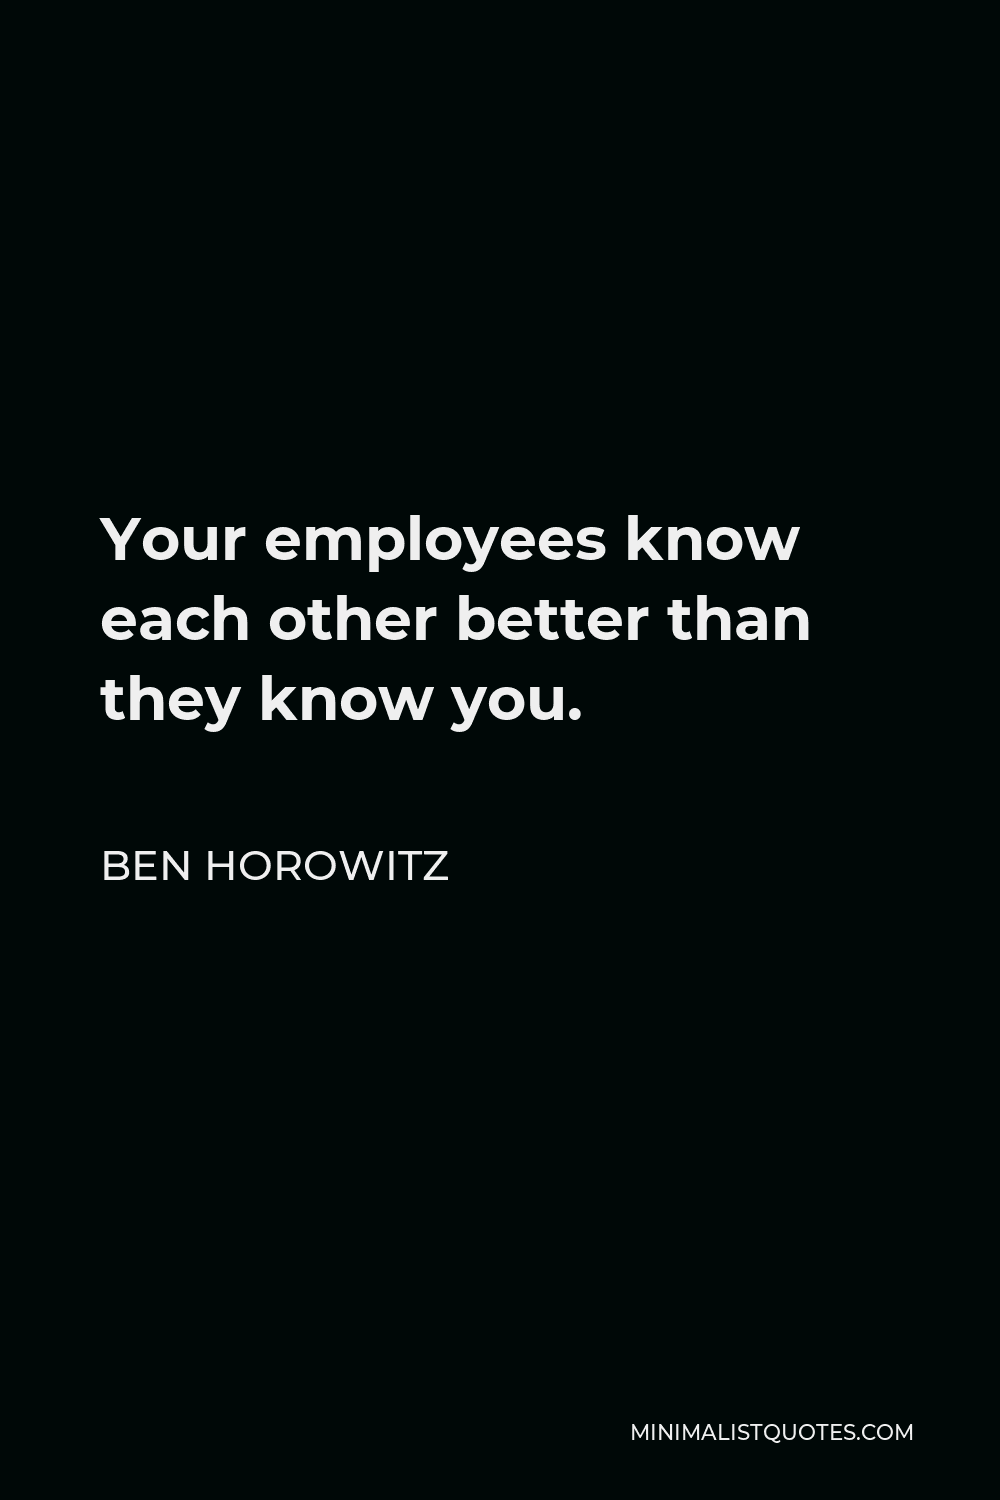 Ben Horowitz Quote - Your employees know each other better than they know you.